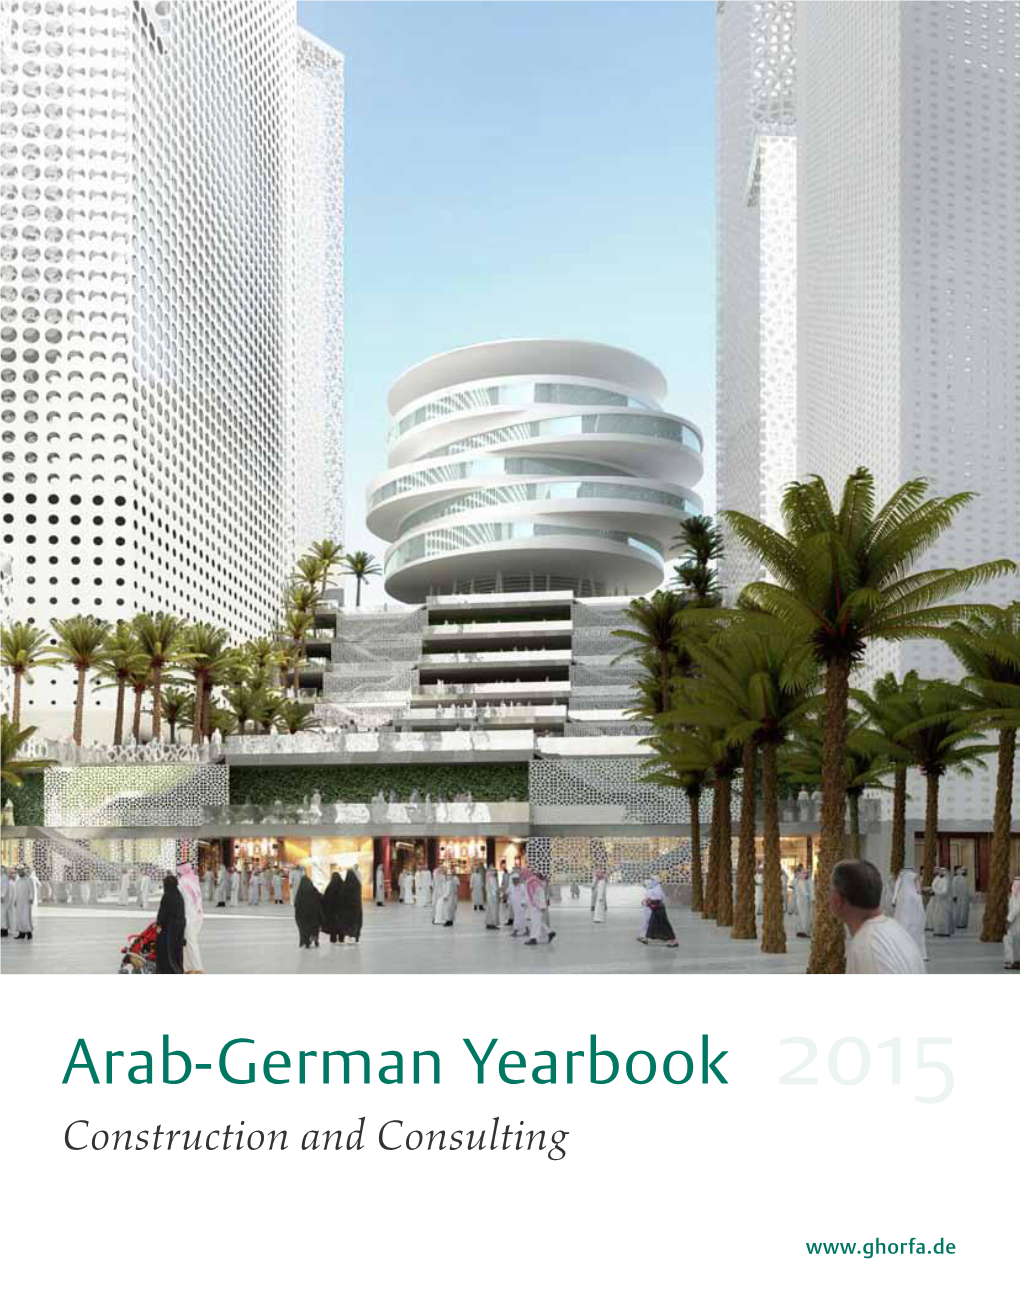 Arab-German Yearbook 2015 Construction and Consulting